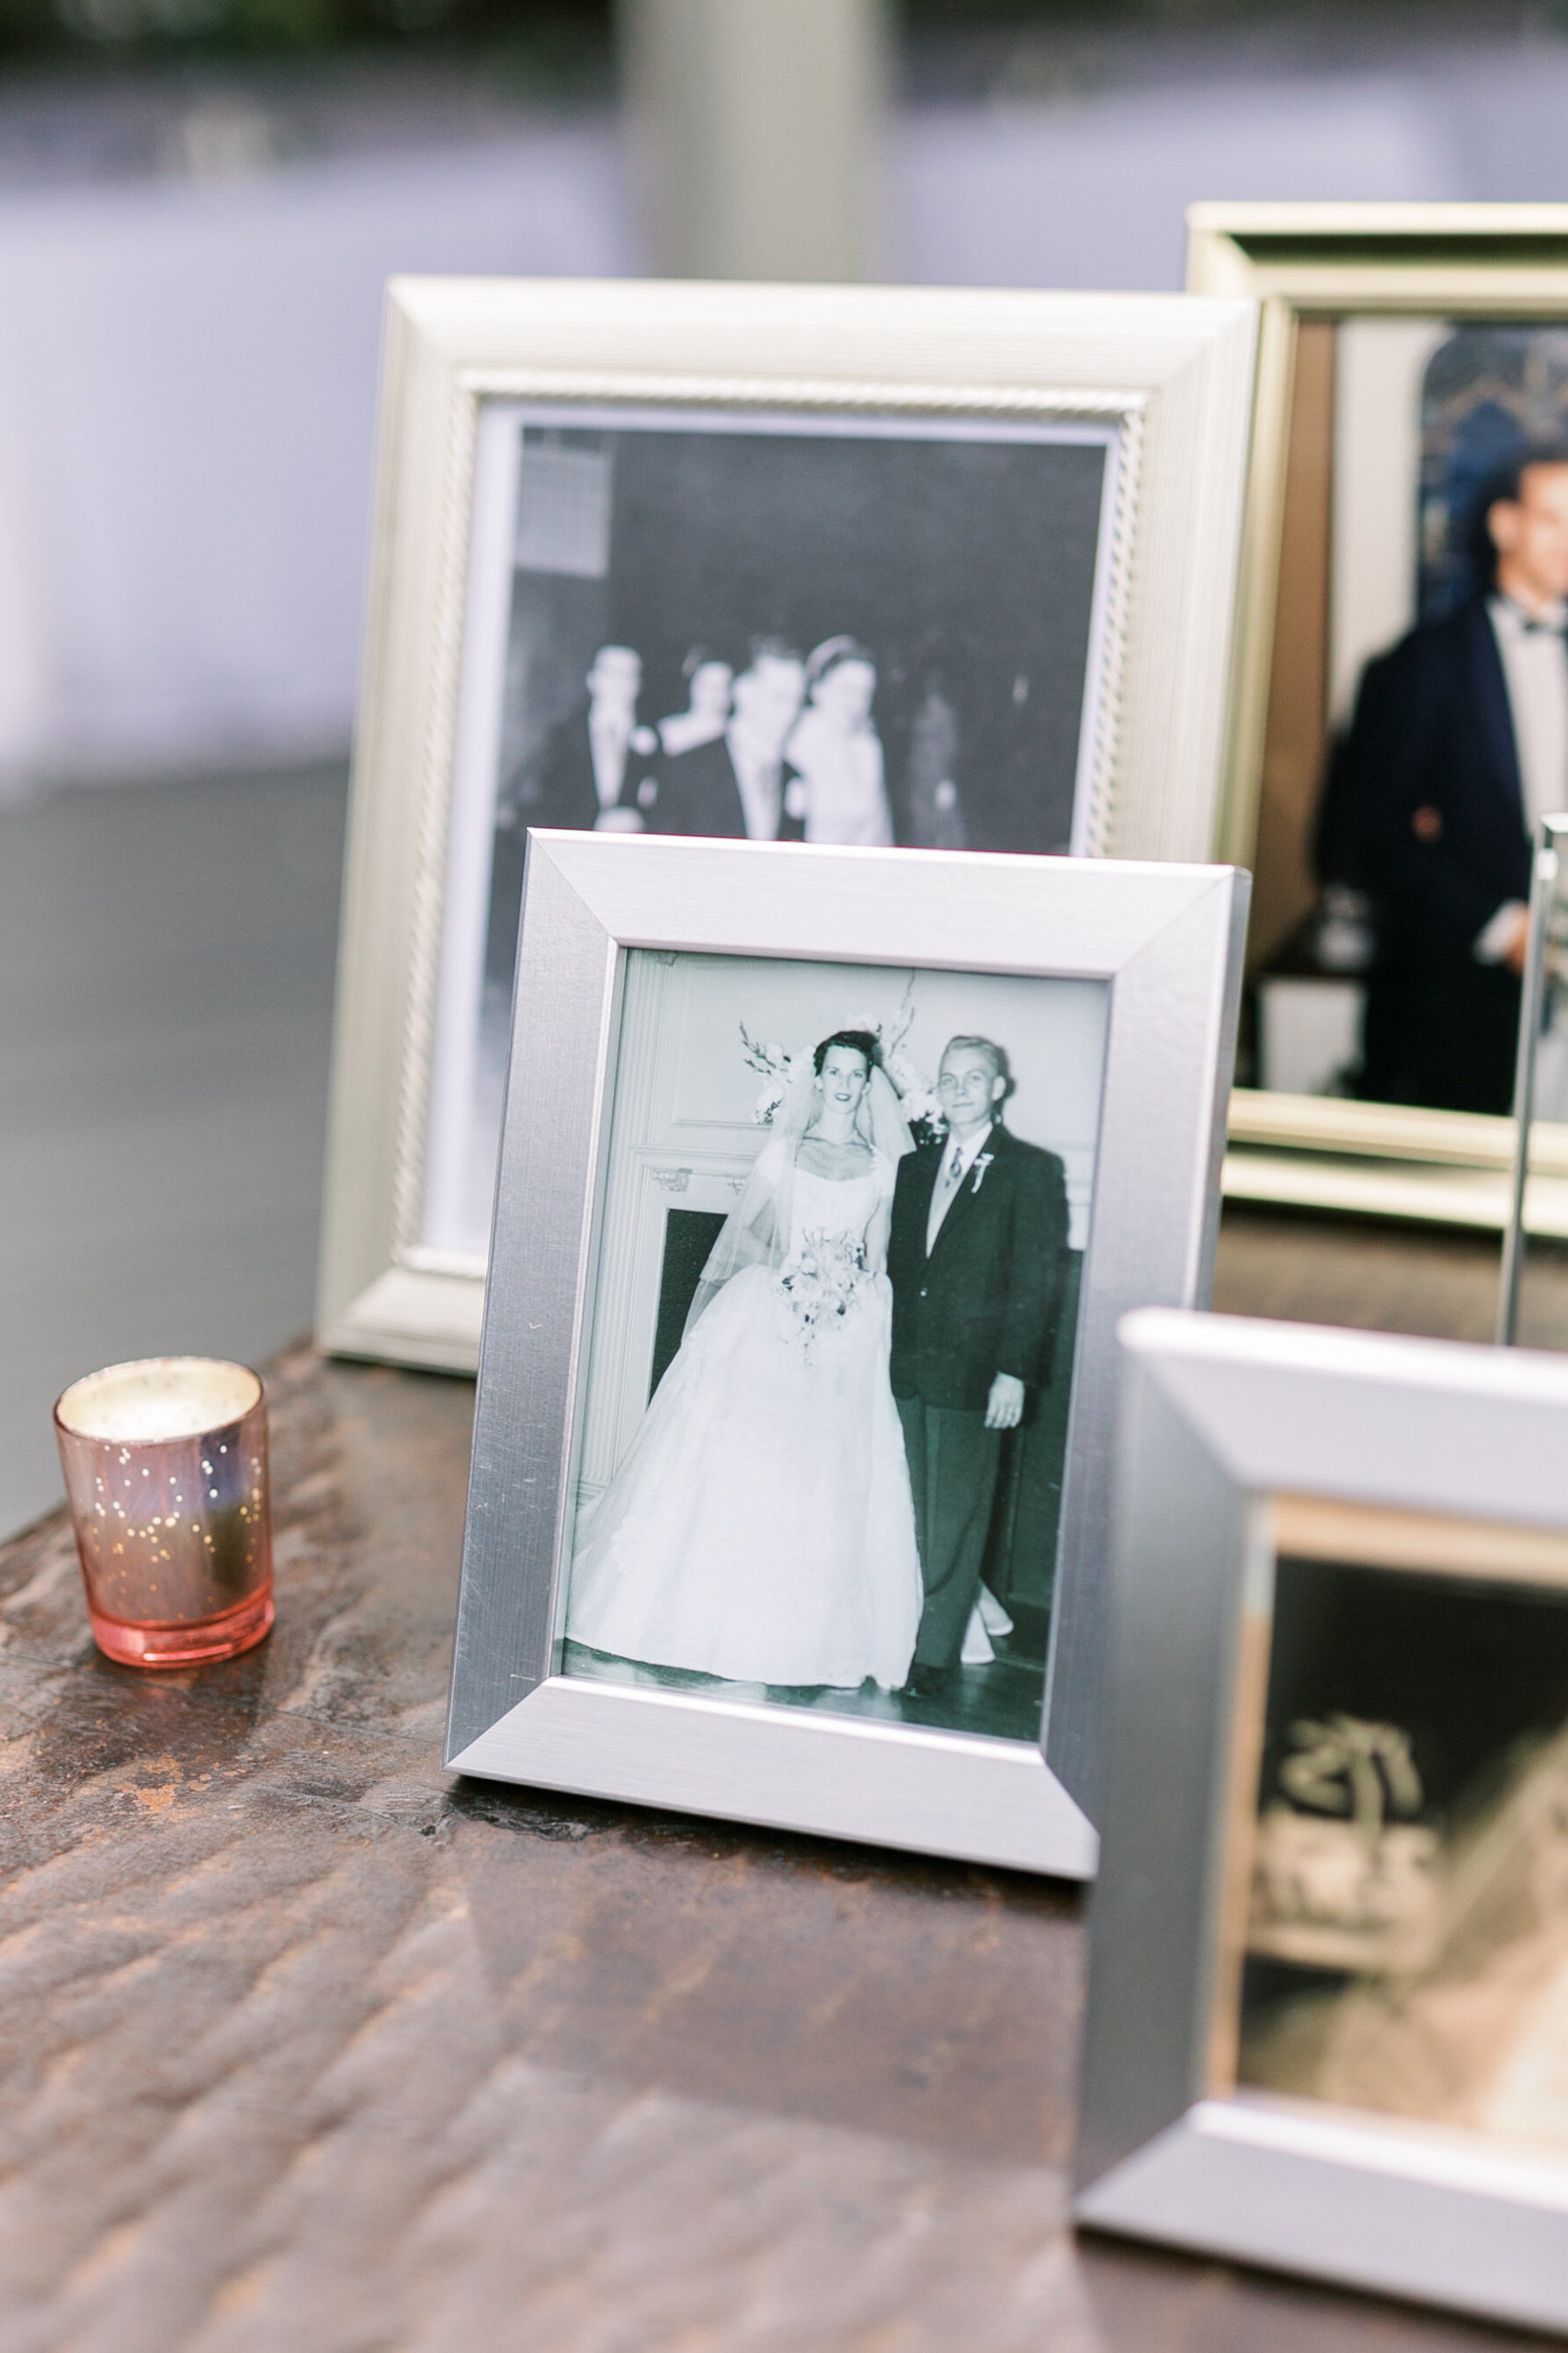 Details of family heirloom wedding images at Hilton Head wedding.